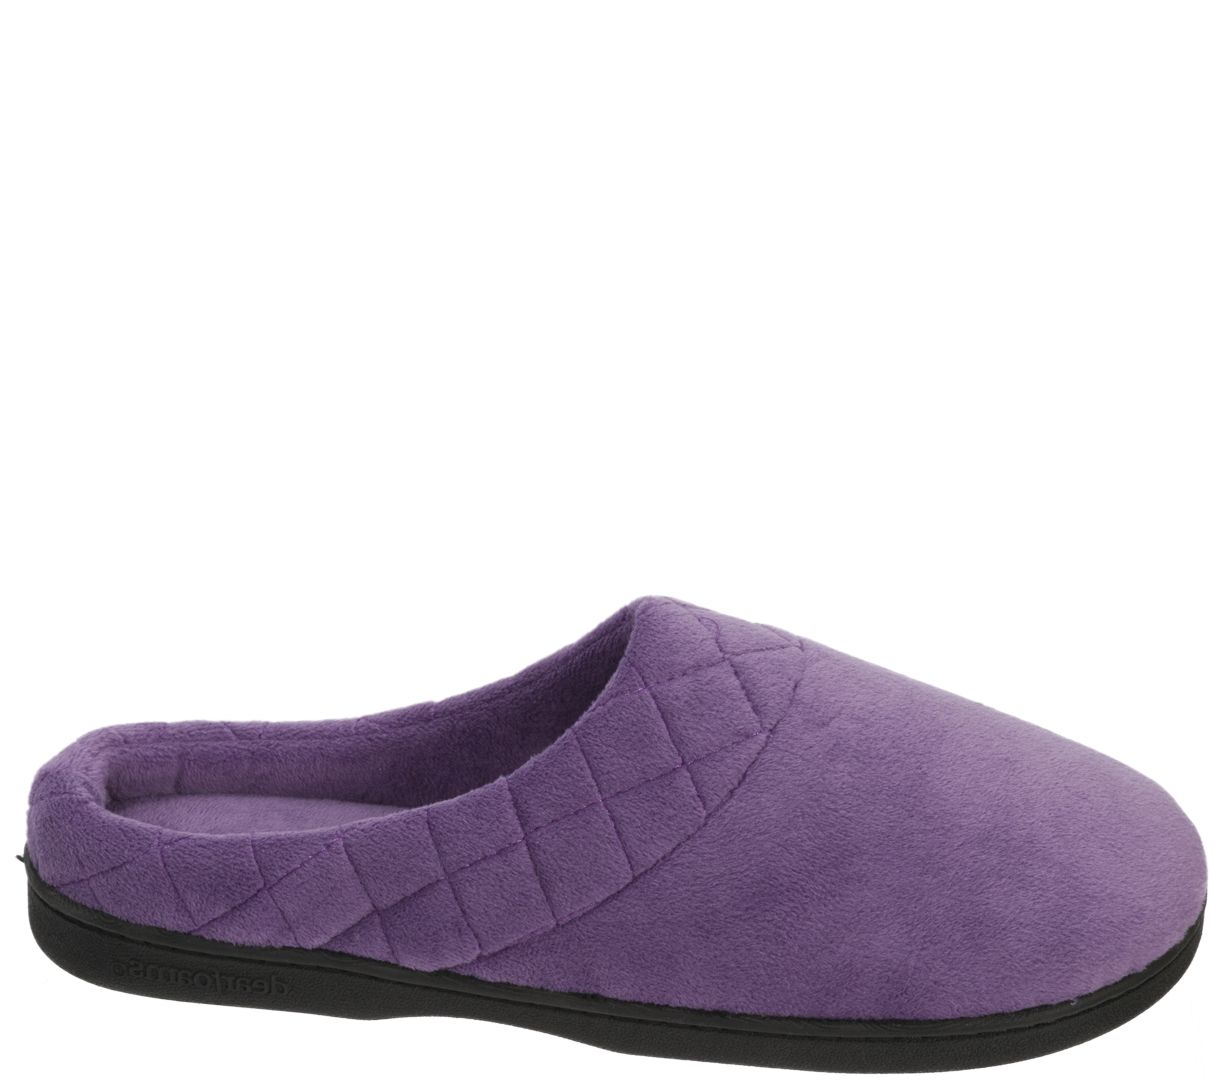 Dearfoams Quilted Cuff Velour Clog Slippers -Darcy - QVC.com